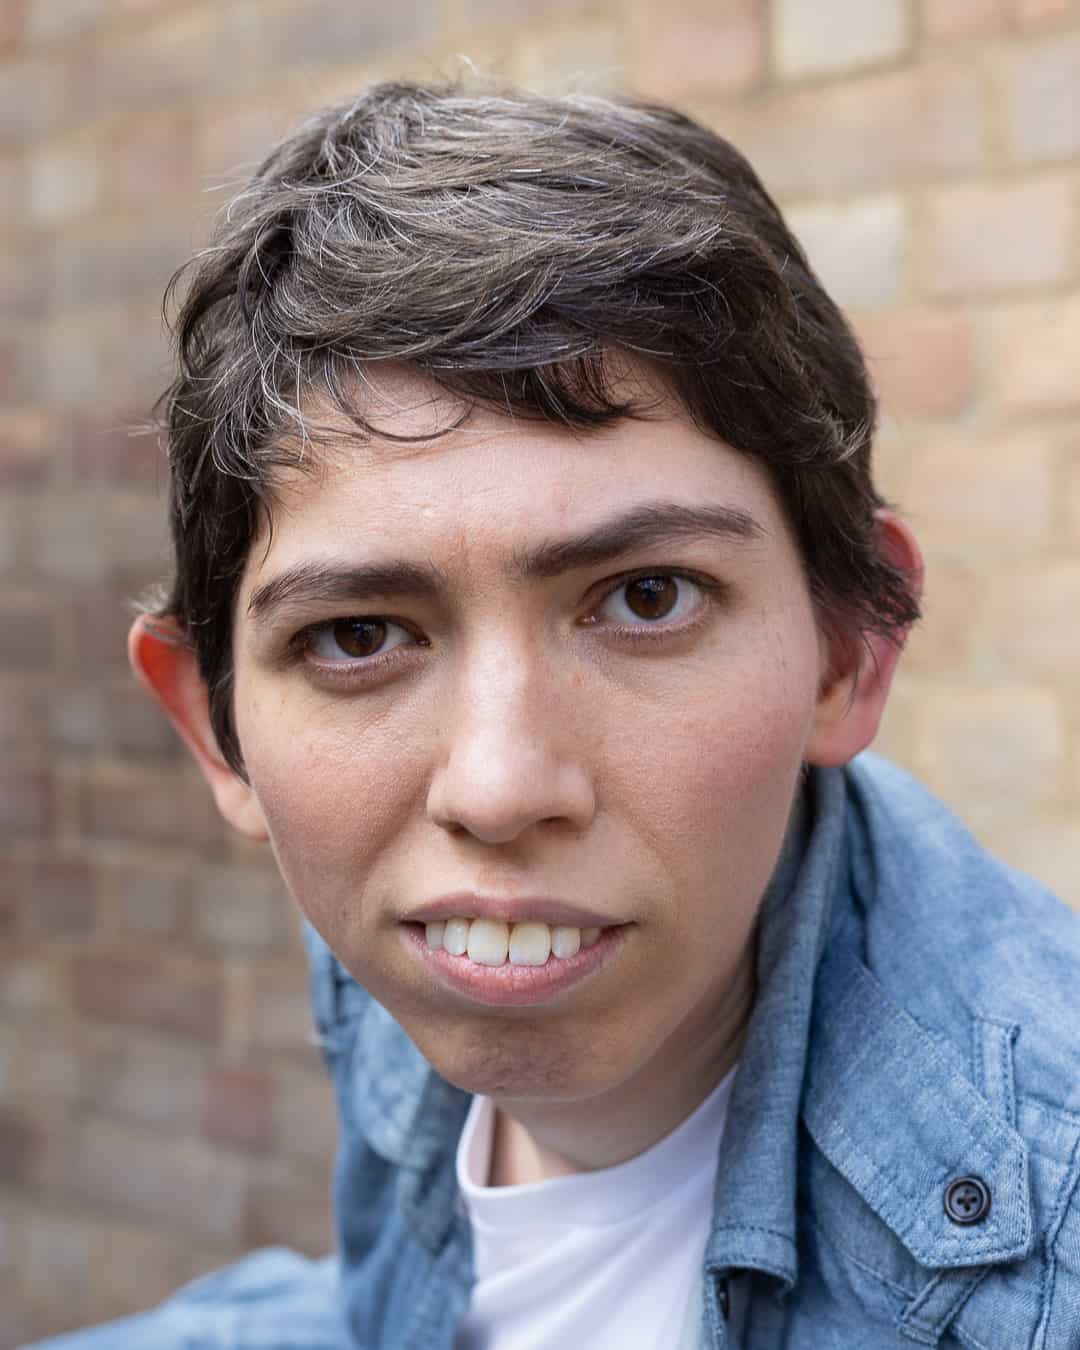 A headshot of Jessi, a white non-binary person with short brown hair and brown eyes, sitting in their powered wheelchair (out of shot) in front of a blurred brick wall. Jessi is wearing a light blue shirt over a white t-shirt, and gazing gently at the camera.